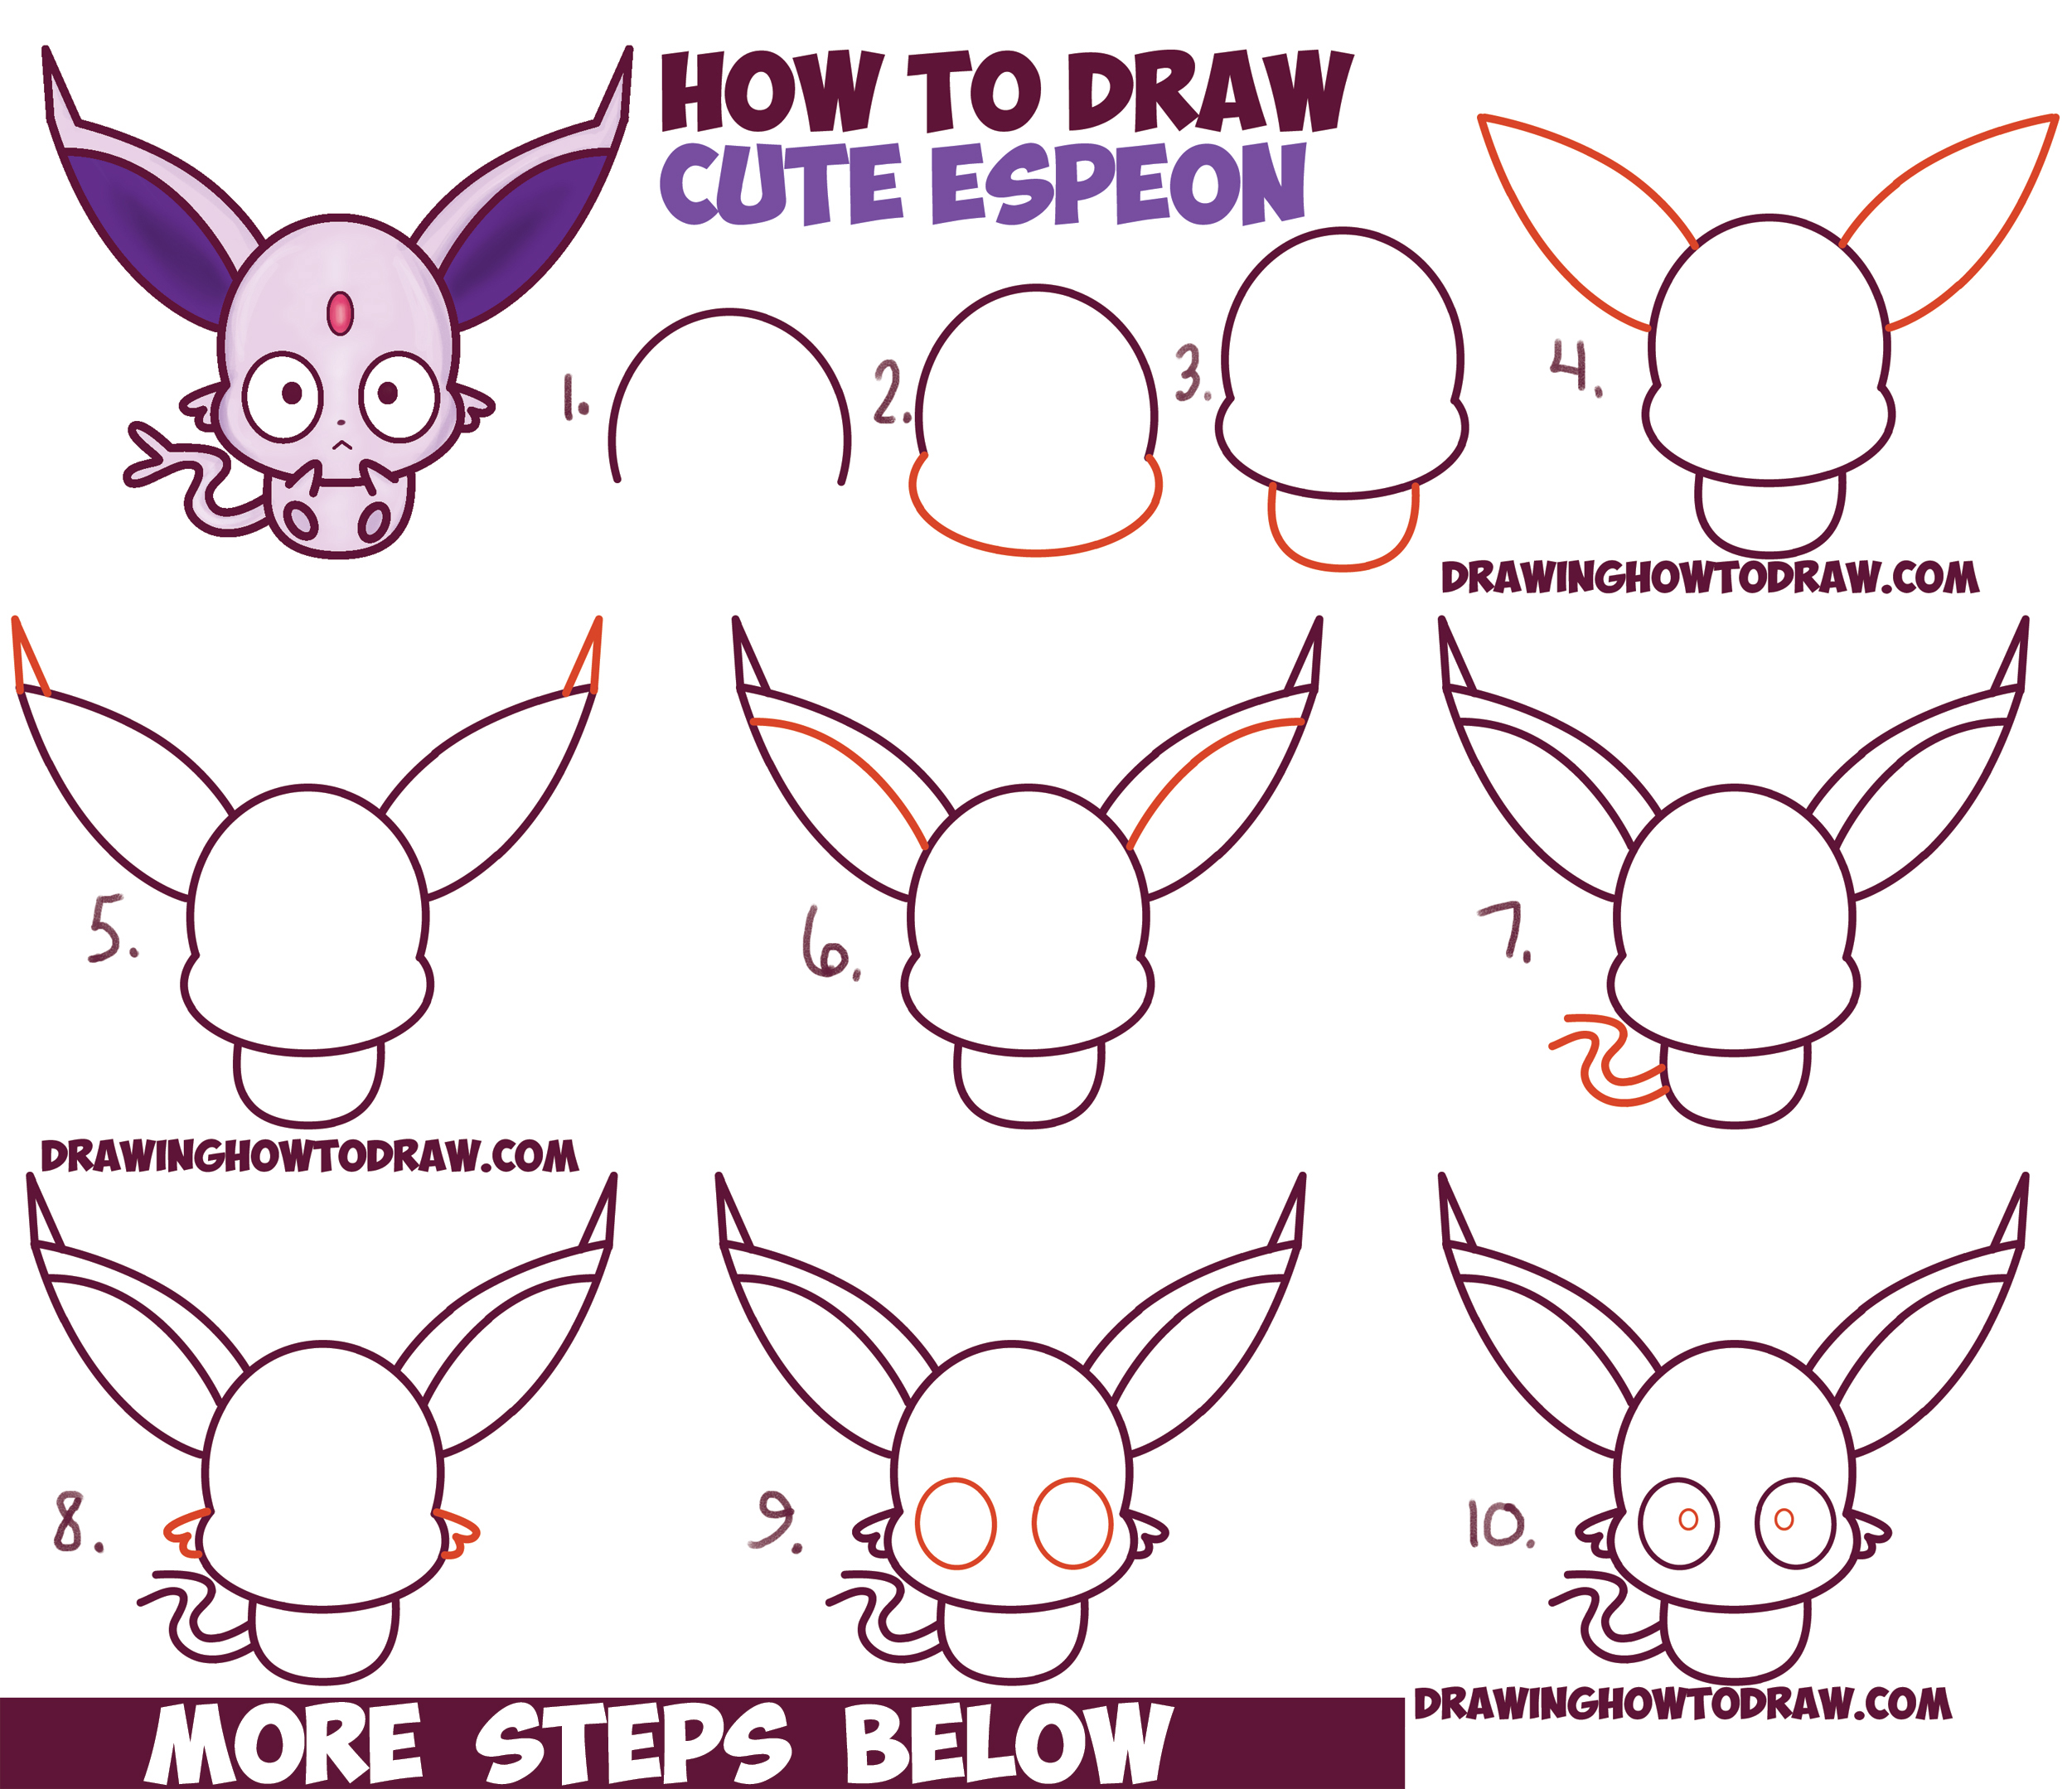 How To Draw Cute Kawaii Chibi Espeon From Pokemon Easy Step By Step